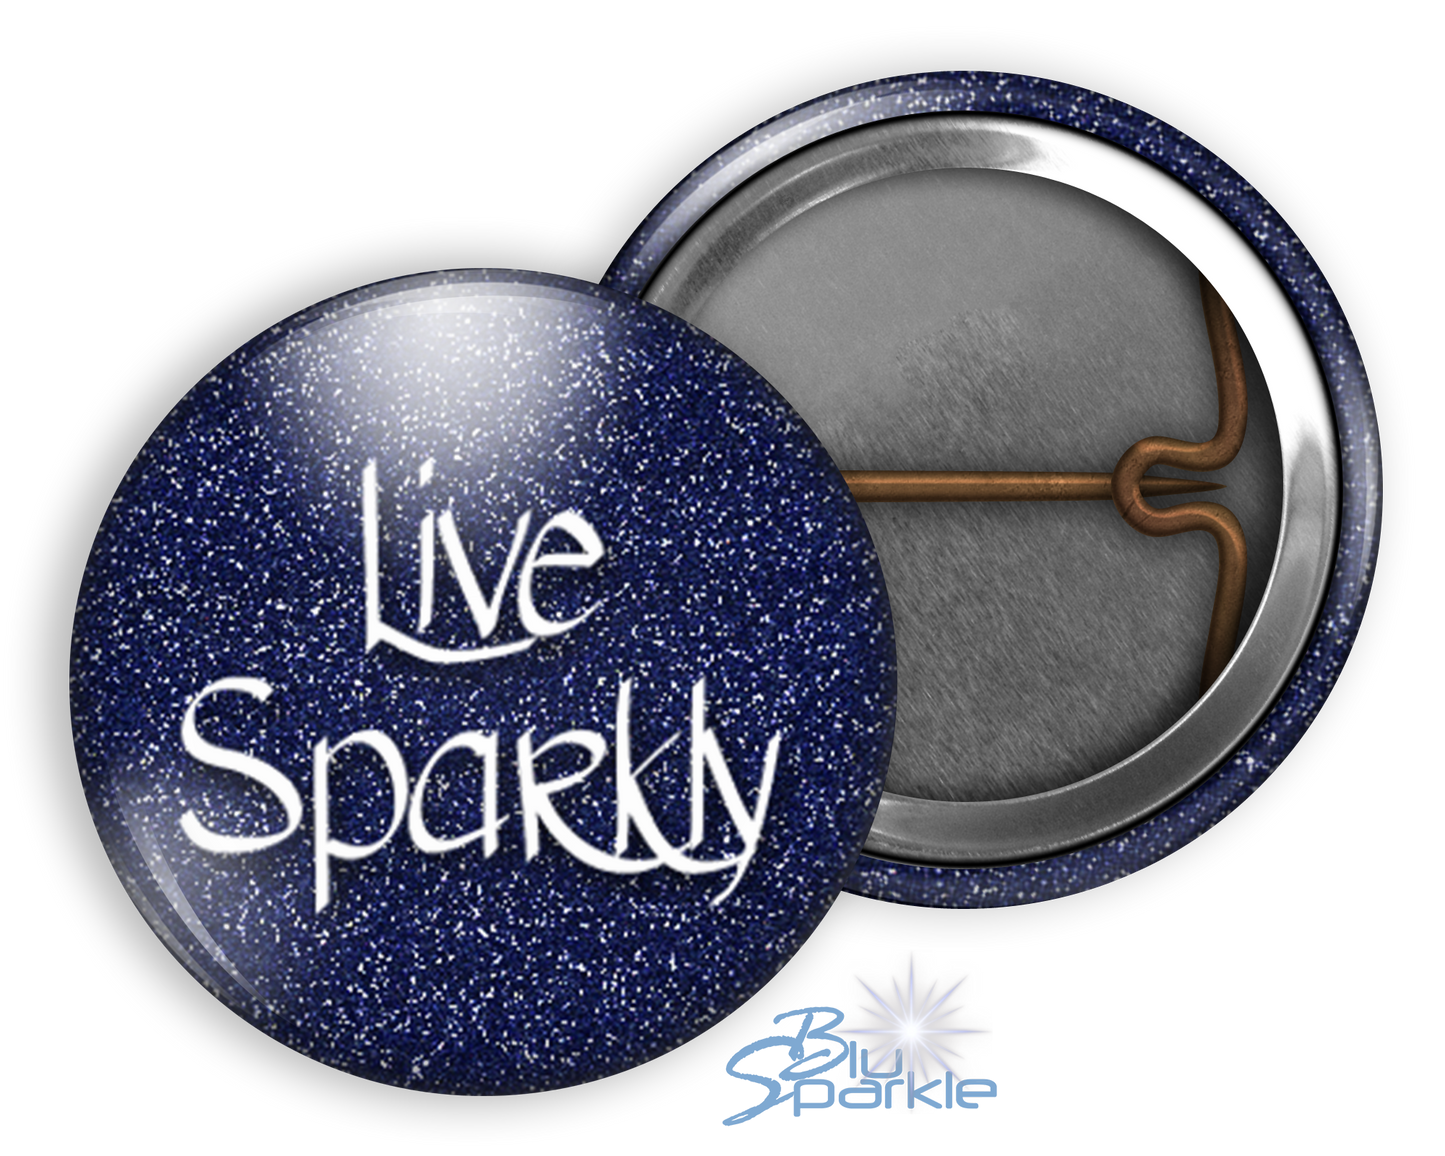 Live Sparkly - Pinback Buttons